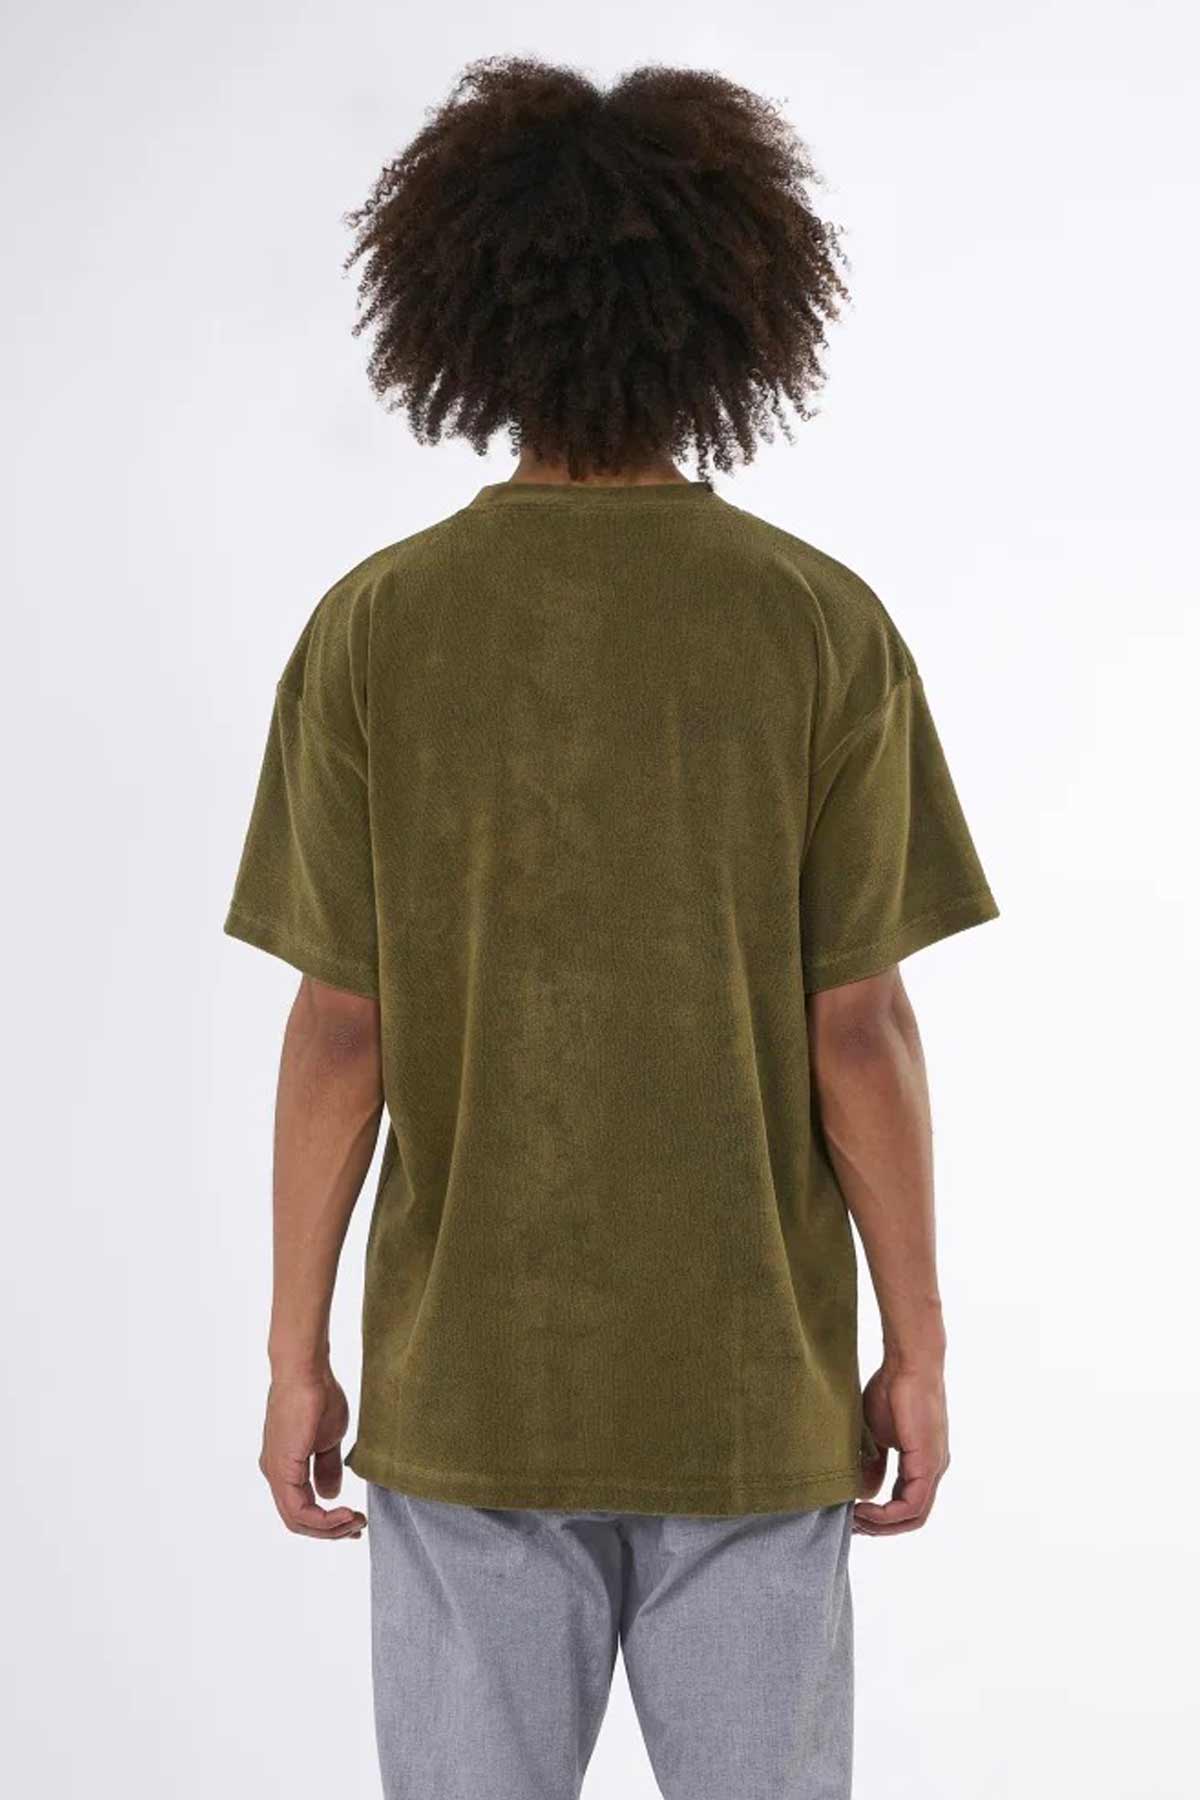 Terry Loose T-Shirt - Knowledge Cotton Apparel